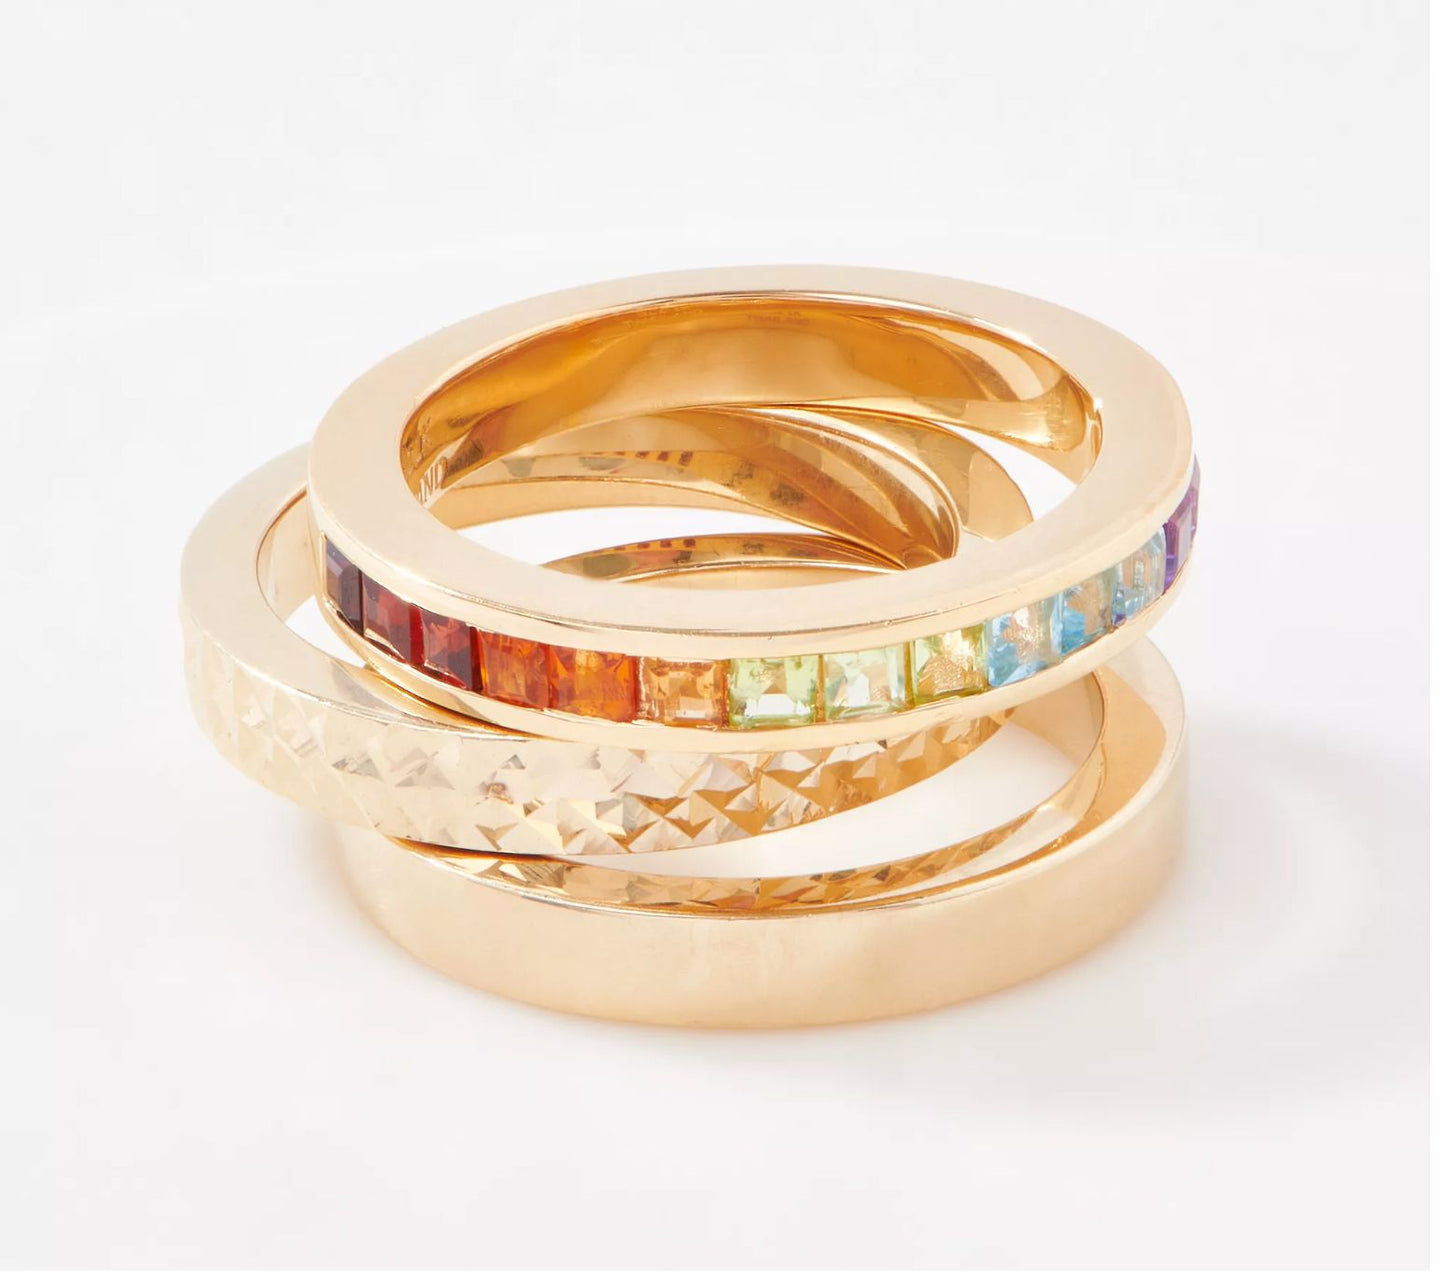 Gold One QVC 1K Gold Set of 3 Stackable Band Ring, Multicolor, Size 5